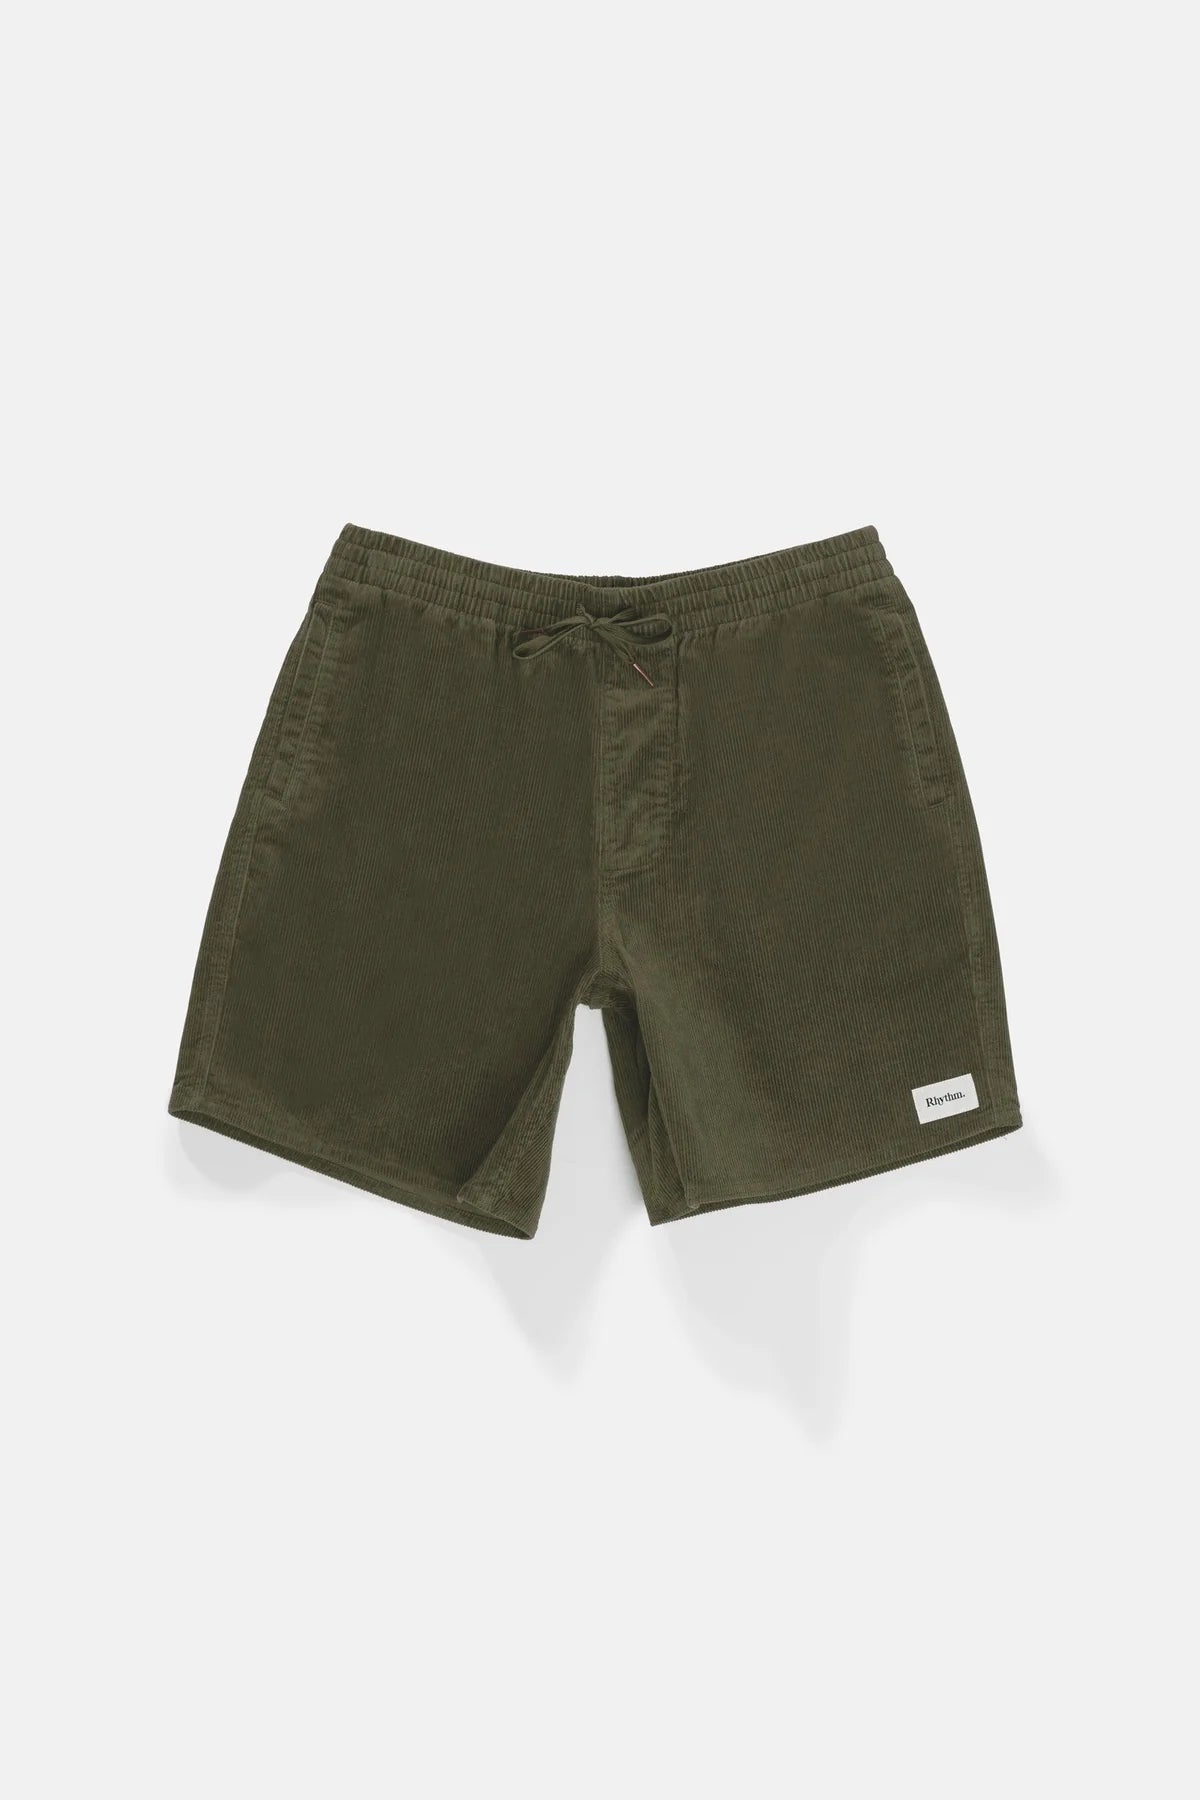 Classic Cord Jam Olive | Collective Request 